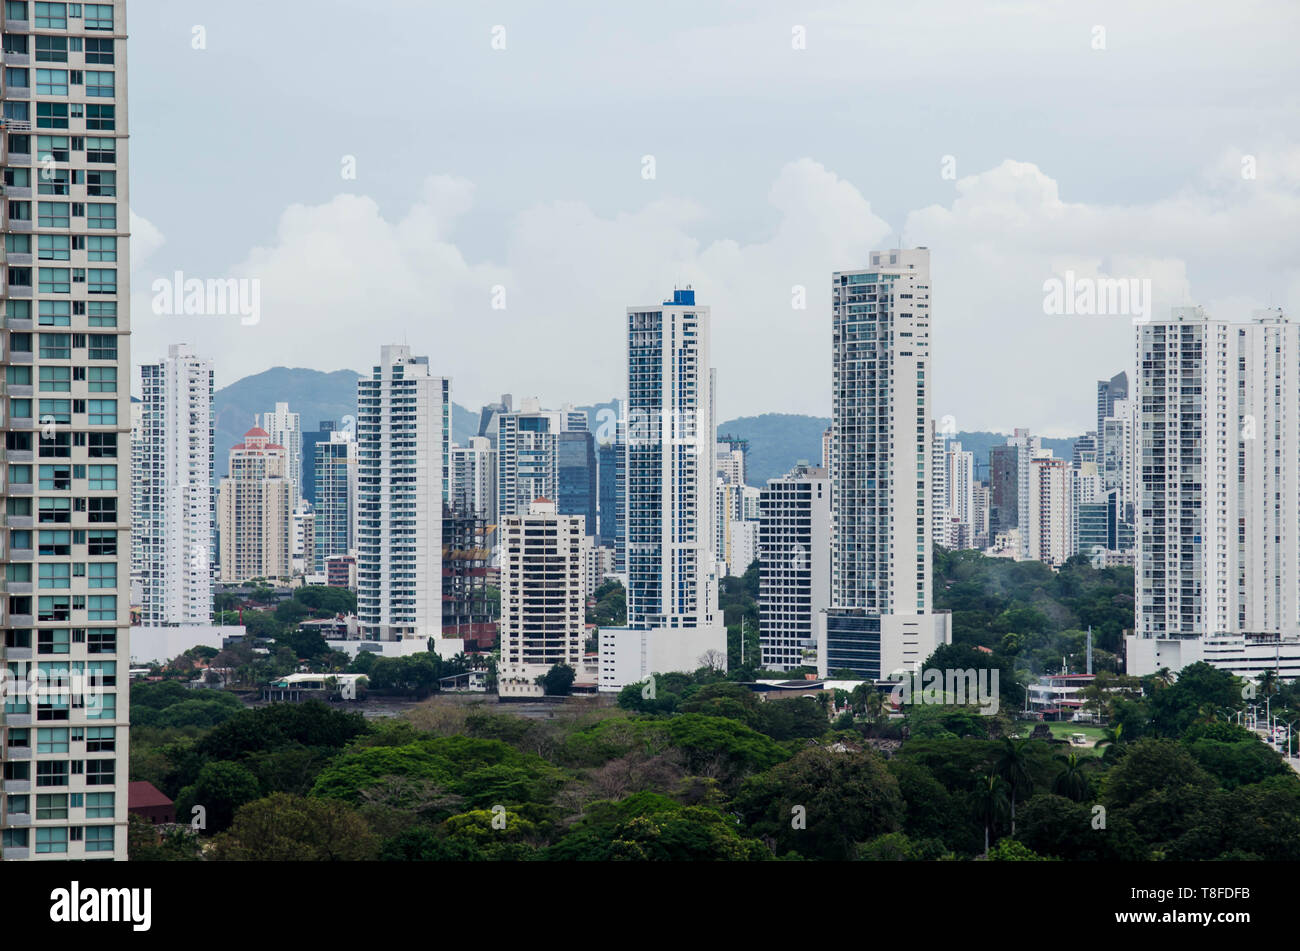 Cloudy day in Panama City skyline as seen from Costa del Este Stock Photo